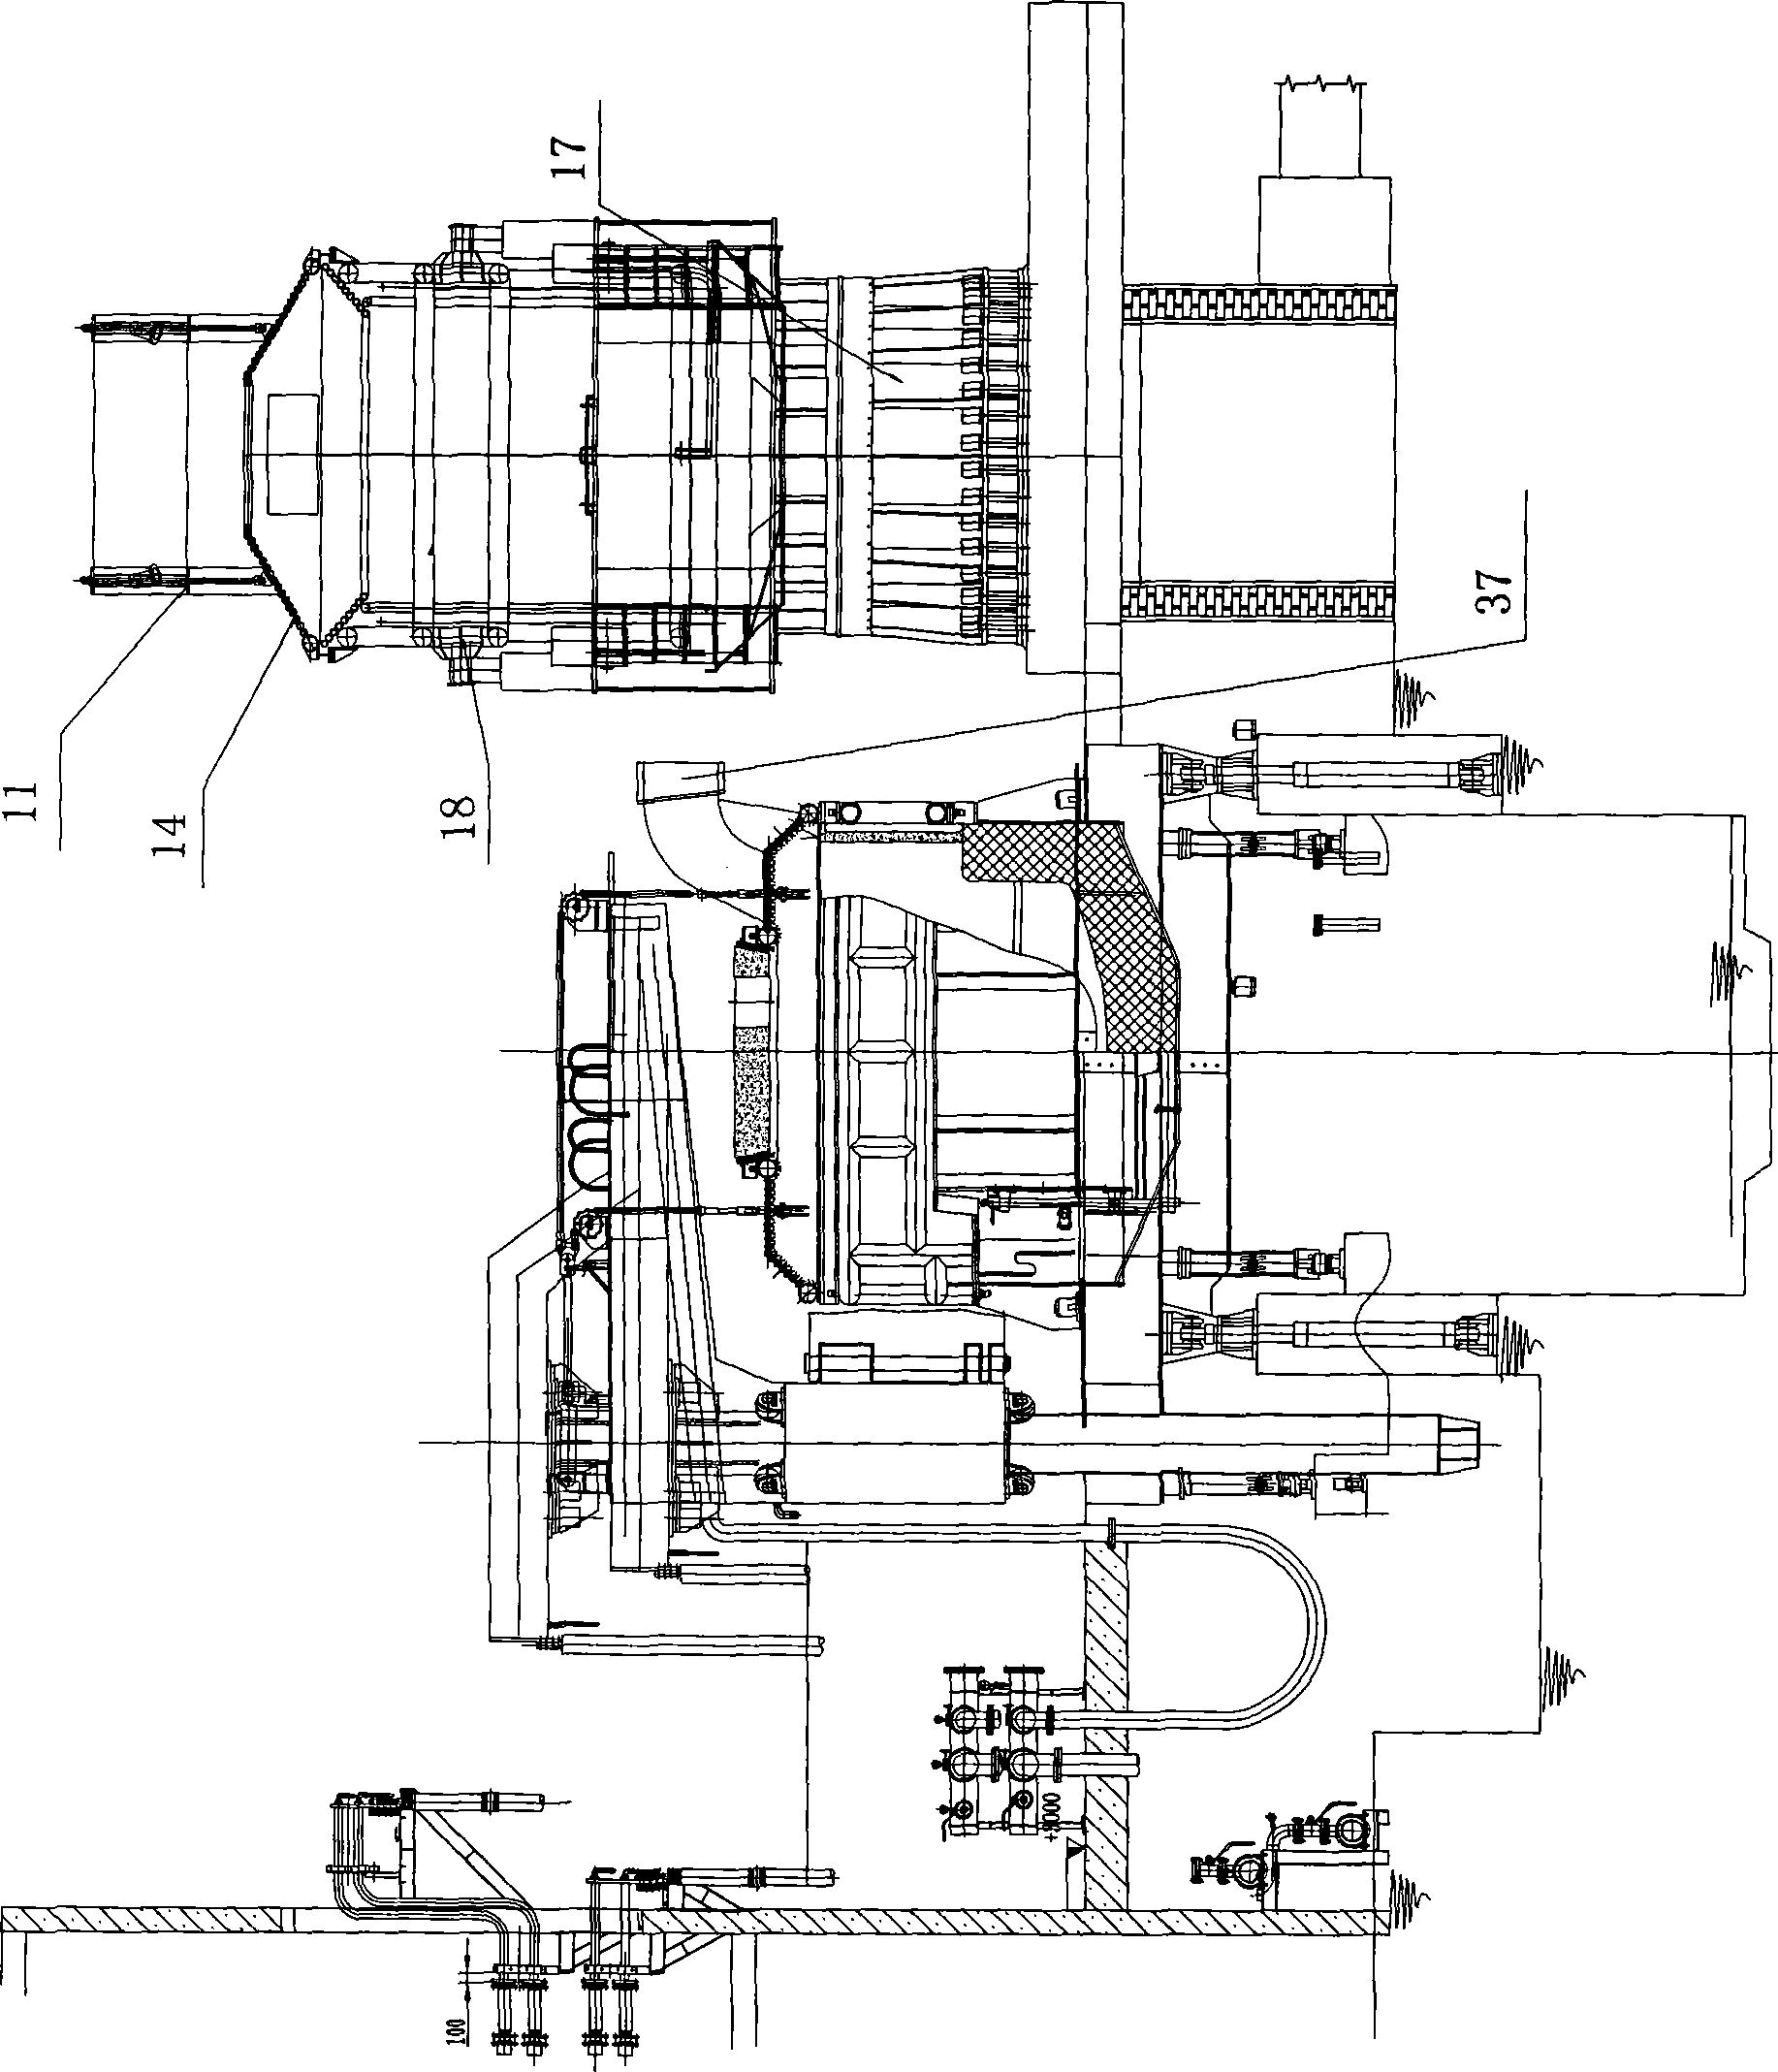 Scrap steel preheating system for electric arc furnace